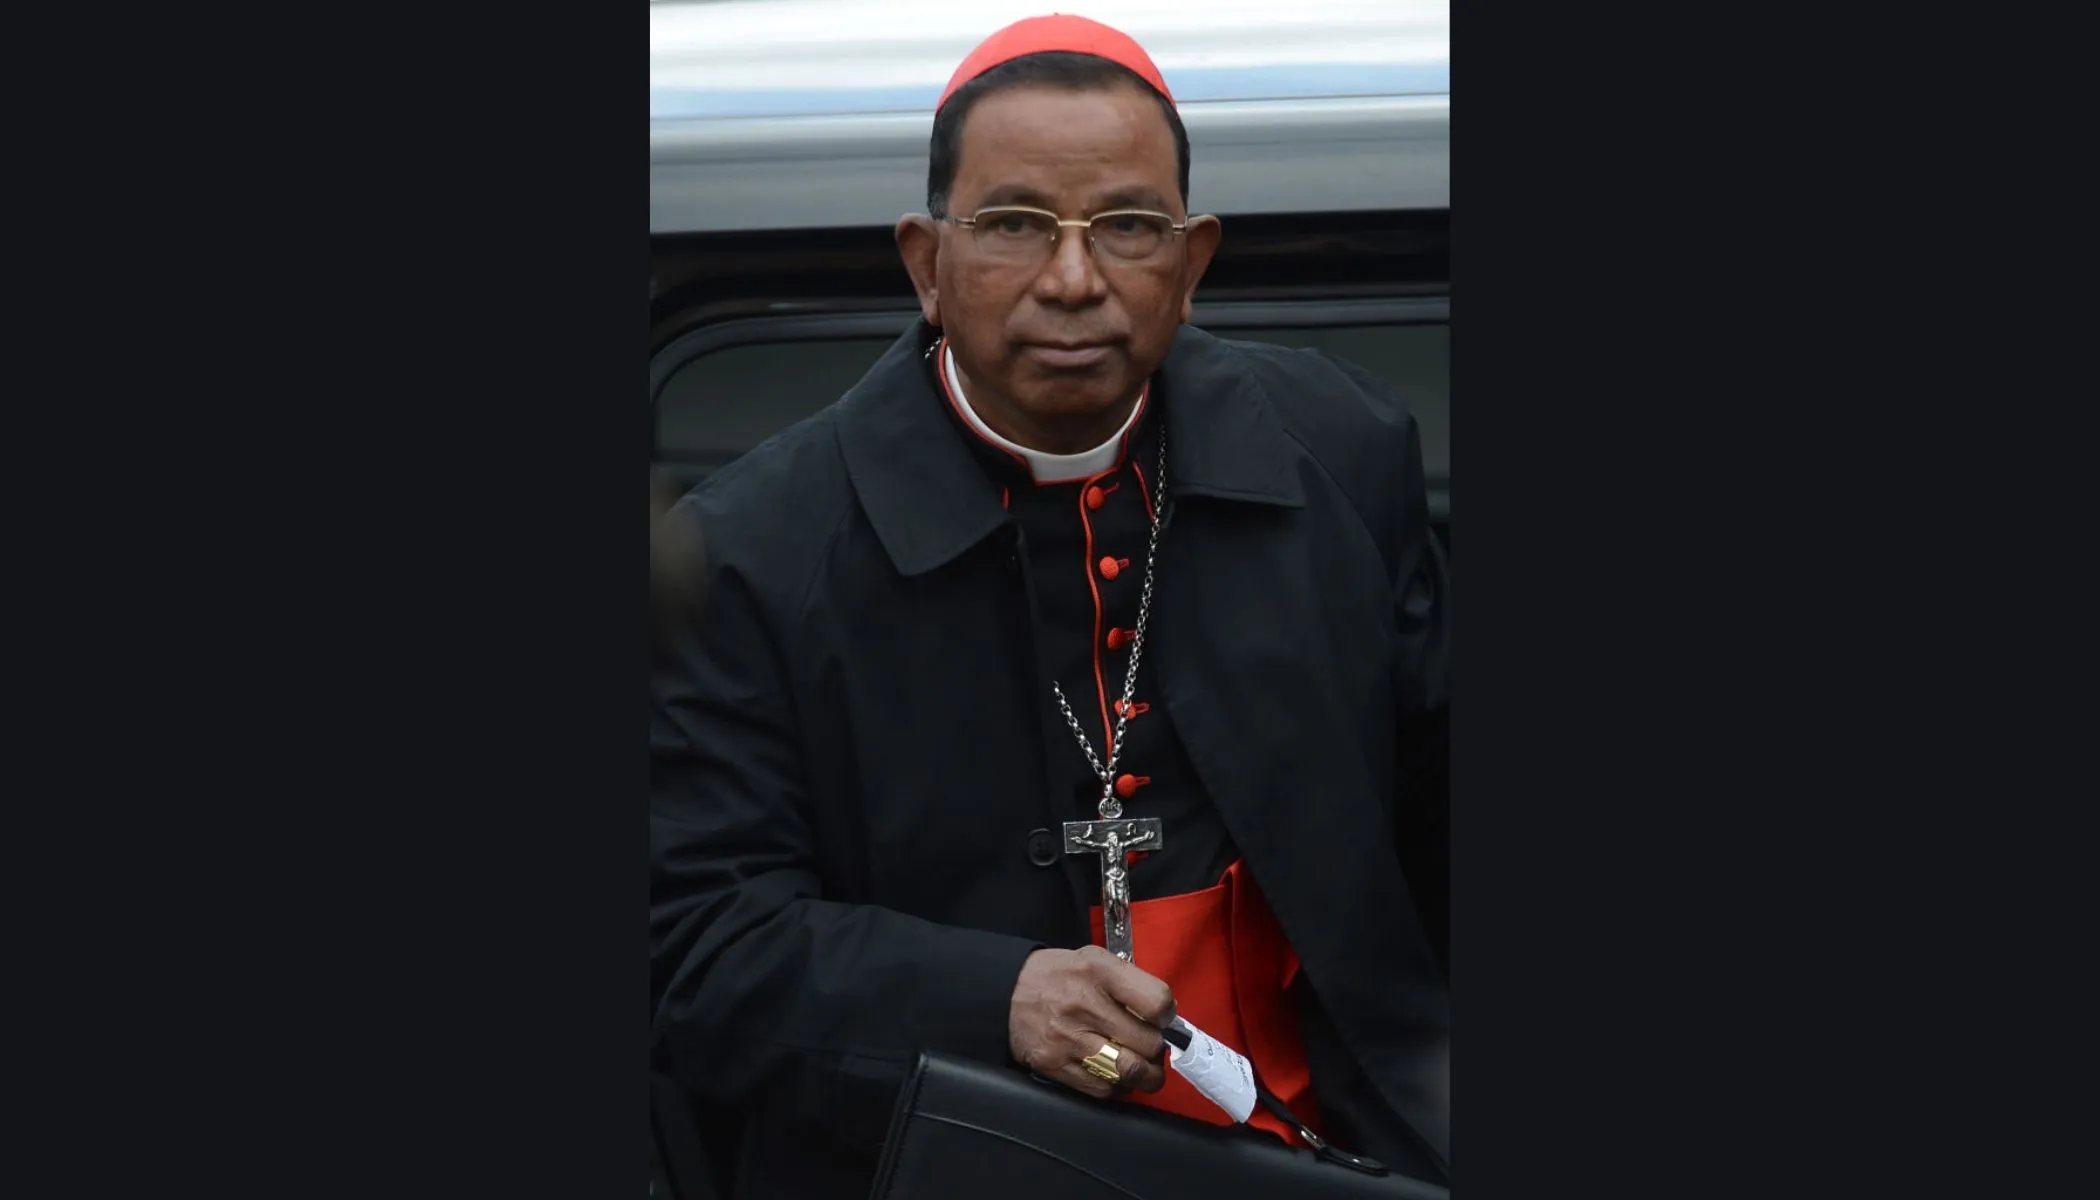 Indian Cardinal Telesphore Toppo arrives for a meeting of pre-conclave on March 9, 2013, at the Vatican.?w=200&h=150